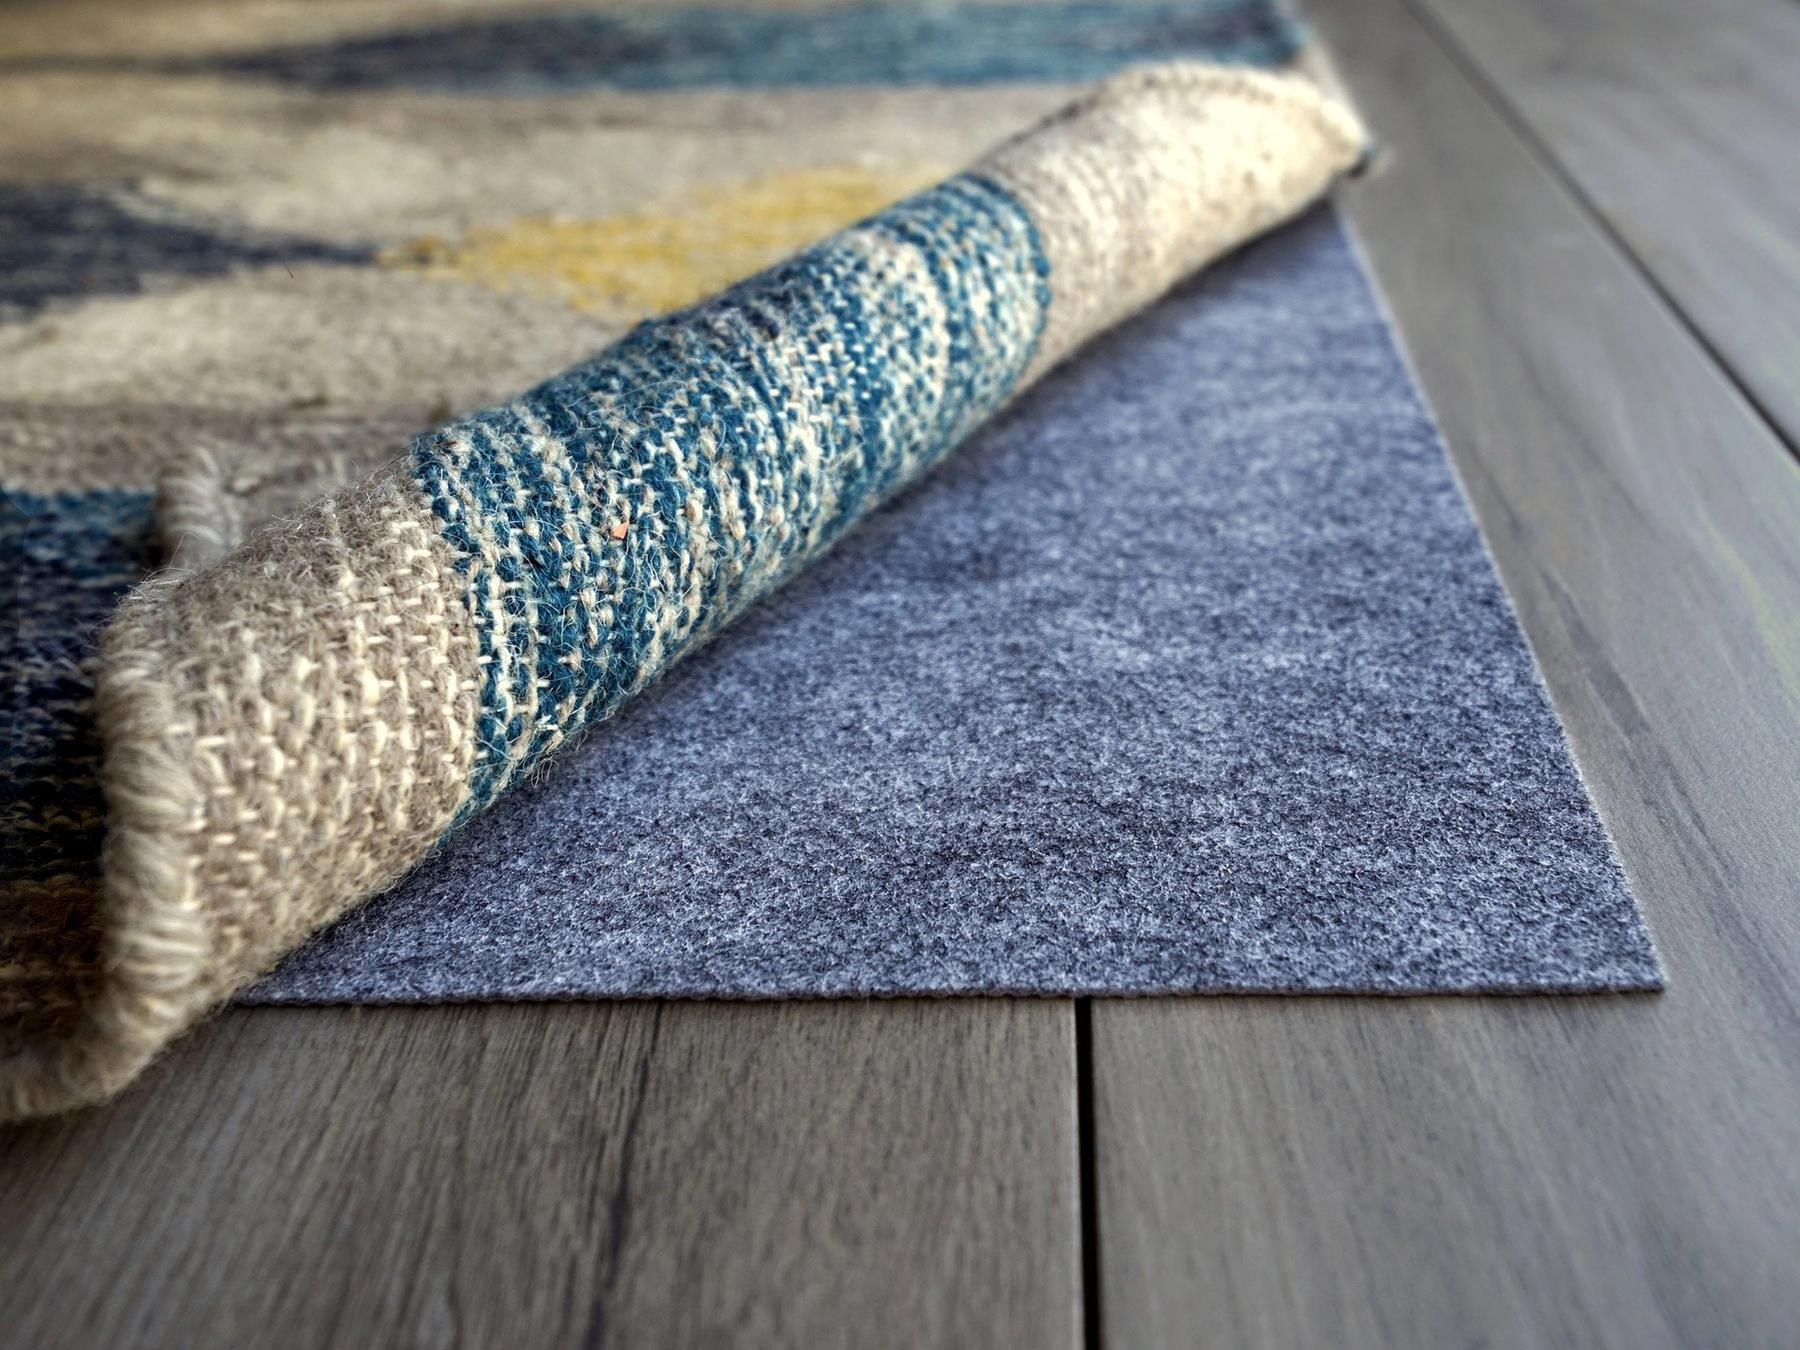 Well Woven Felt Rug Pad | Non-Slip | 8x10 (8' x 10') Size | 1/8 Thick |  Easy to Cut | Safe for Wood Floors | Made in USA